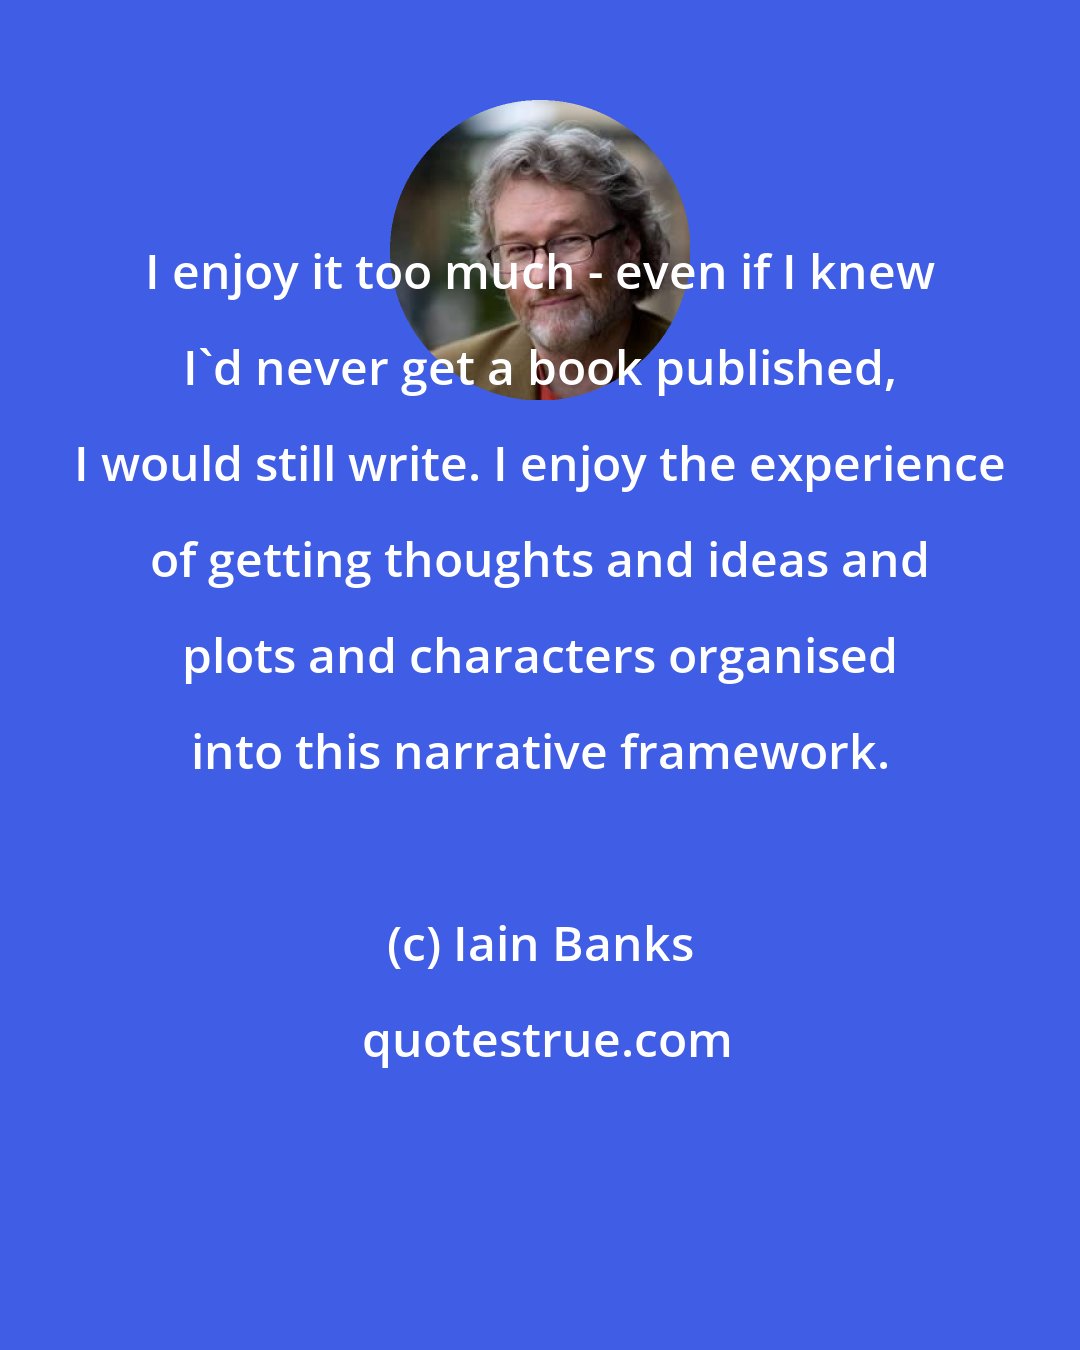 Iain Banks: I enjoy it too much - even if I knew I'd never get a book published, I would still write. I enjoy the experience of getting thoughts and ideas and plots and characters organised into this narrative framework.